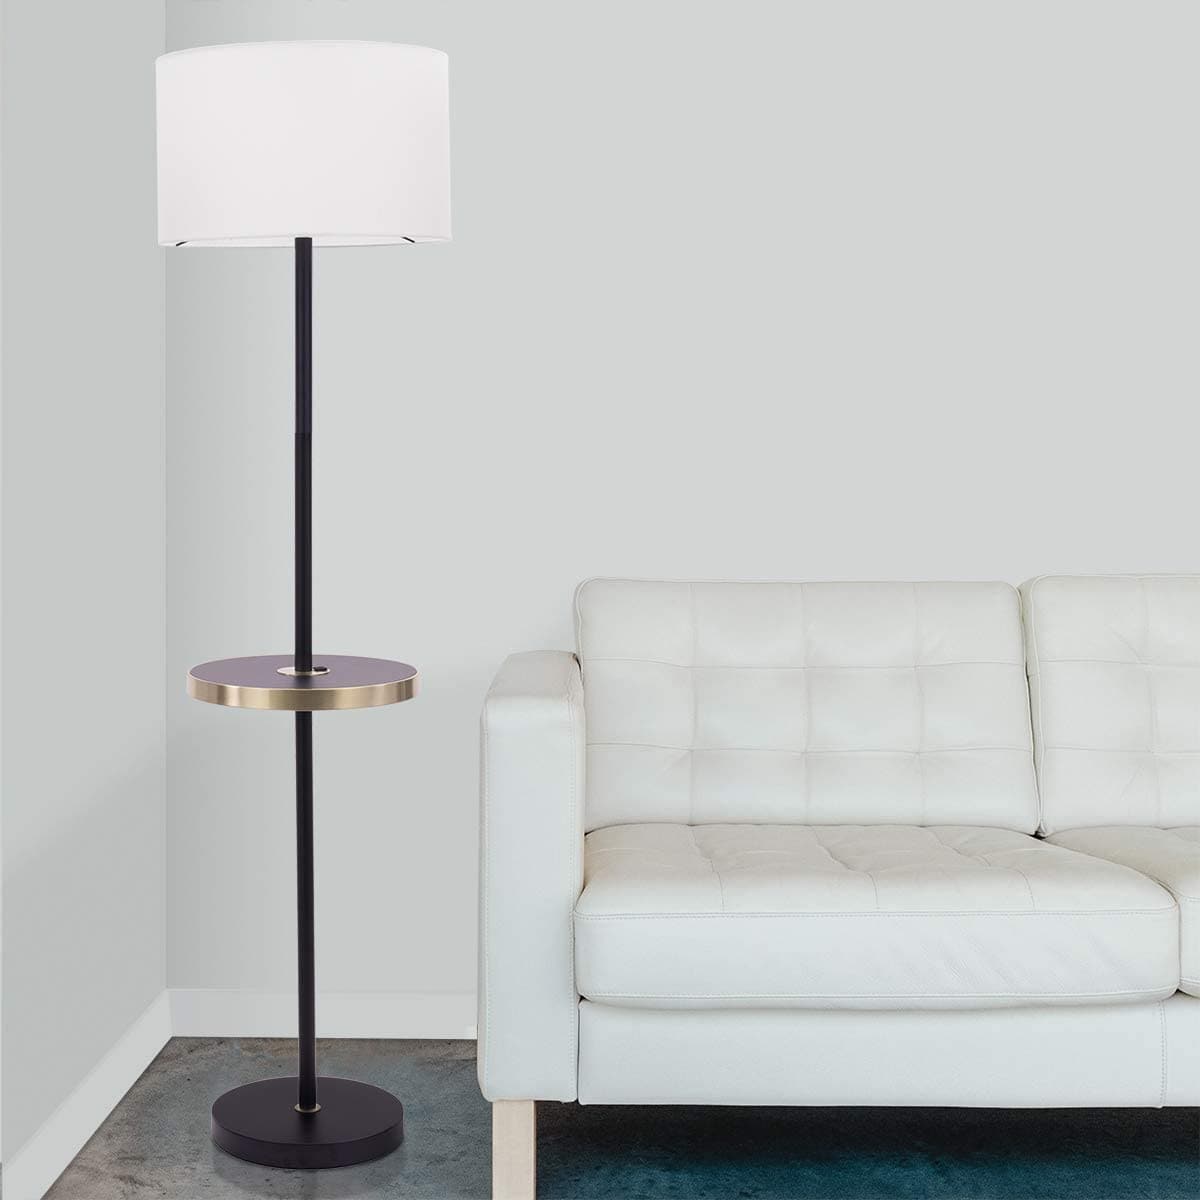 Quality Craft Stick Floor Lamp with Linen Shade and 11" Base - Black - Senior.com Lamps